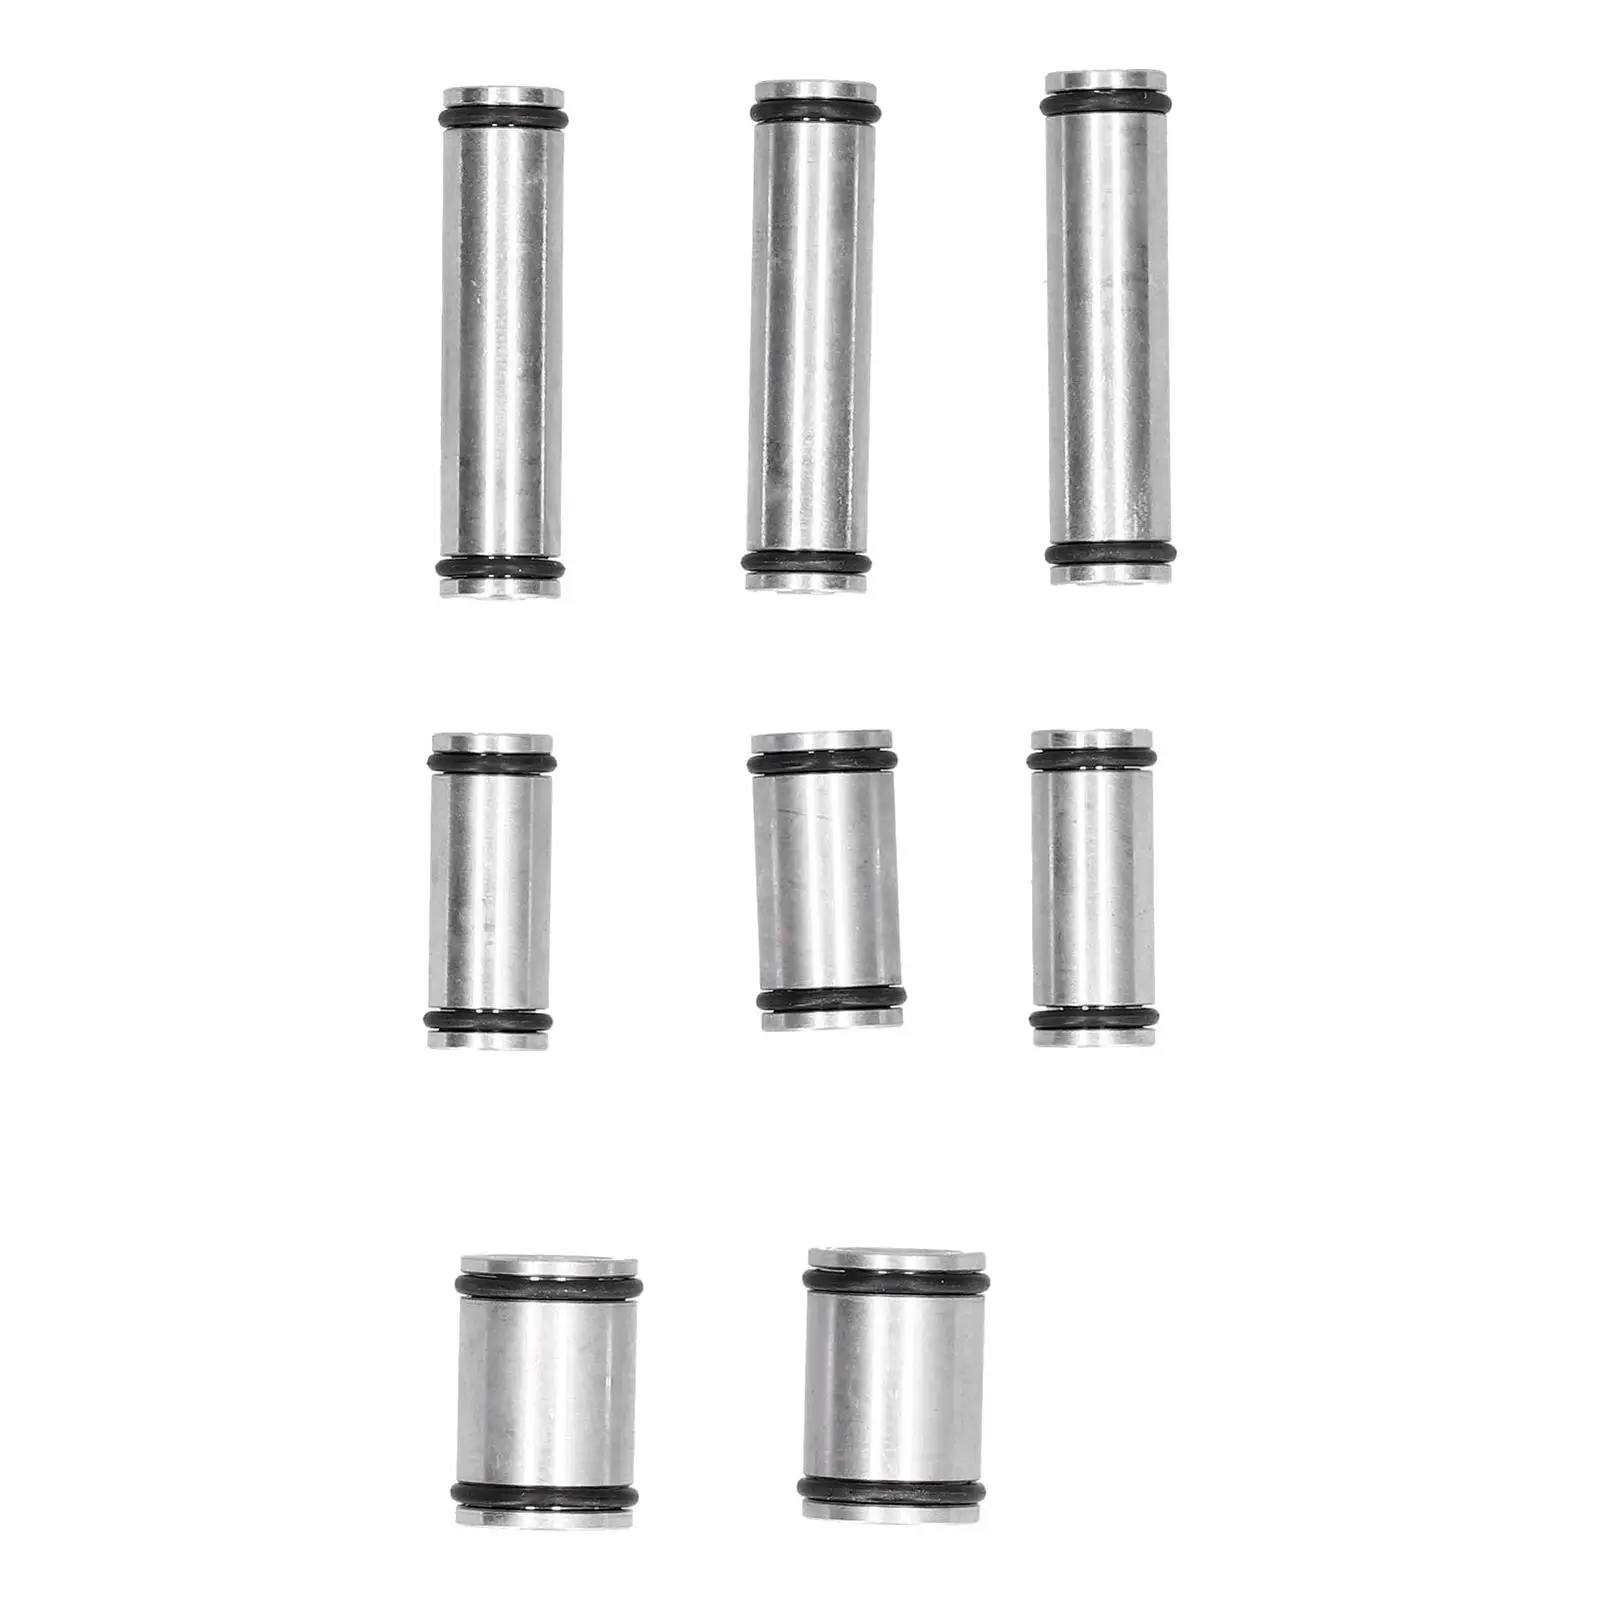 8 pieces 0BH321477 Dq500 0BH Oil  Kit Replacement  for  L4 2.0L rugged and durable,  to deform.